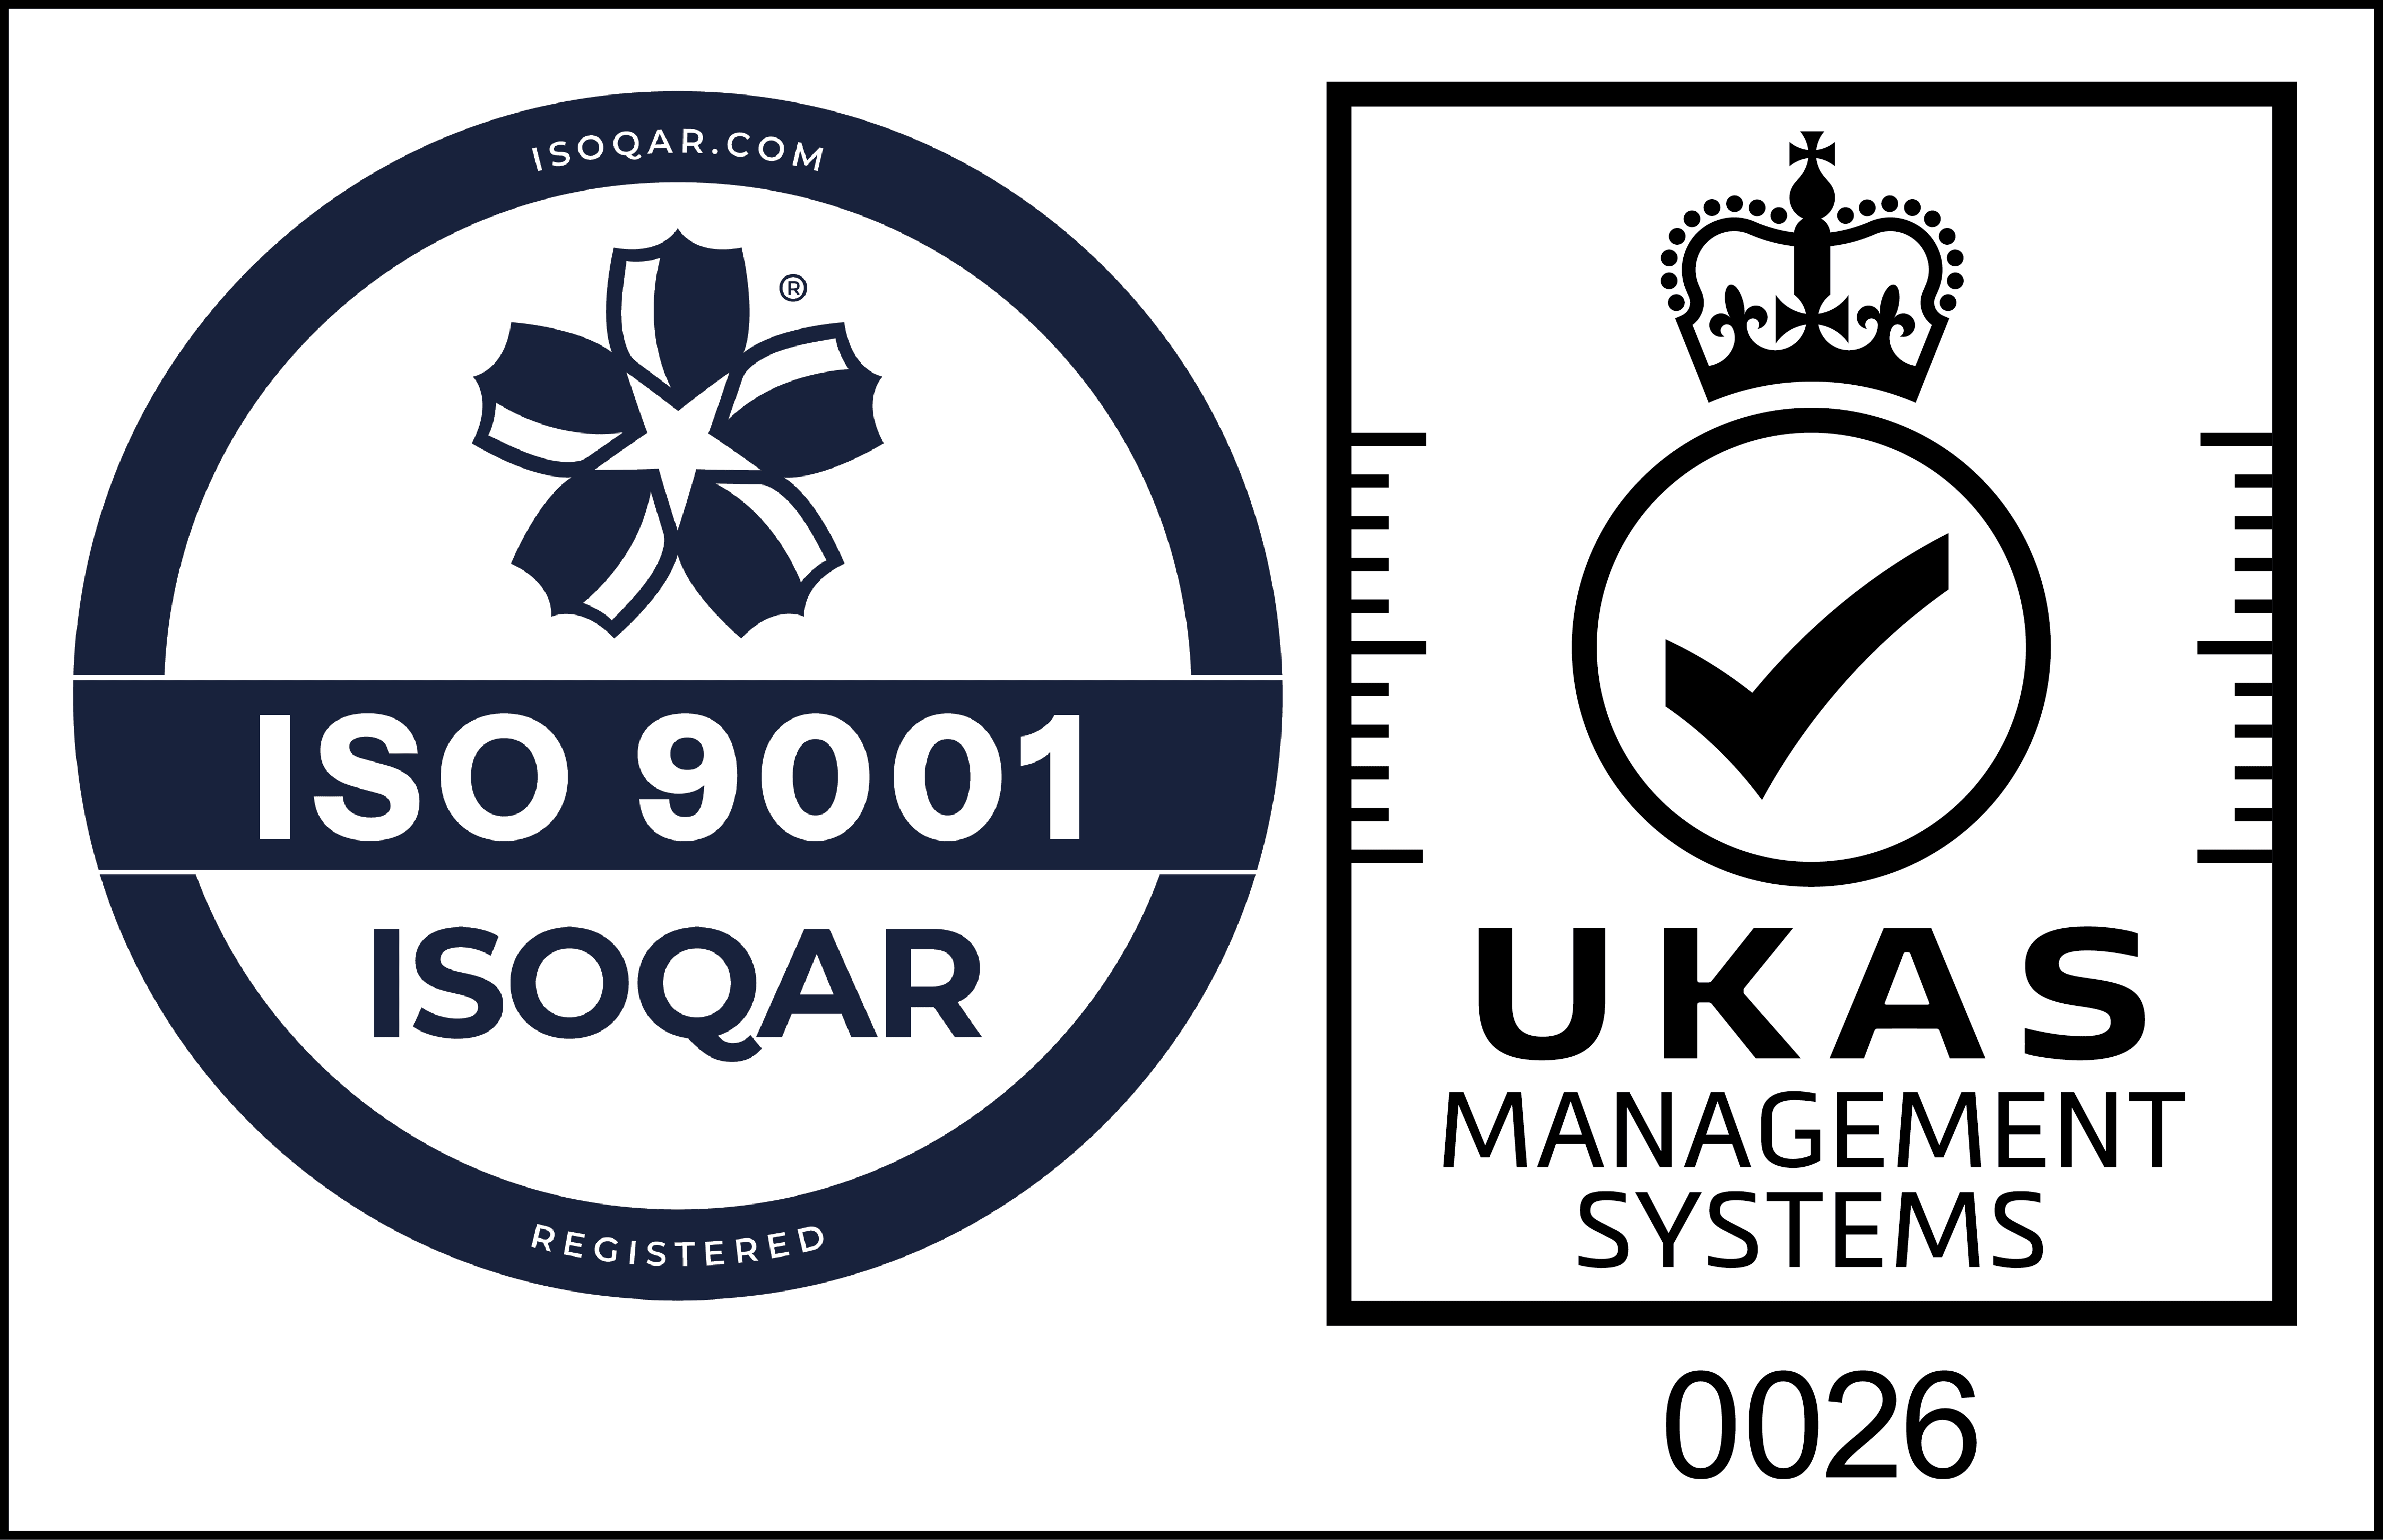 UKAS ISO Joint Logos - 9001